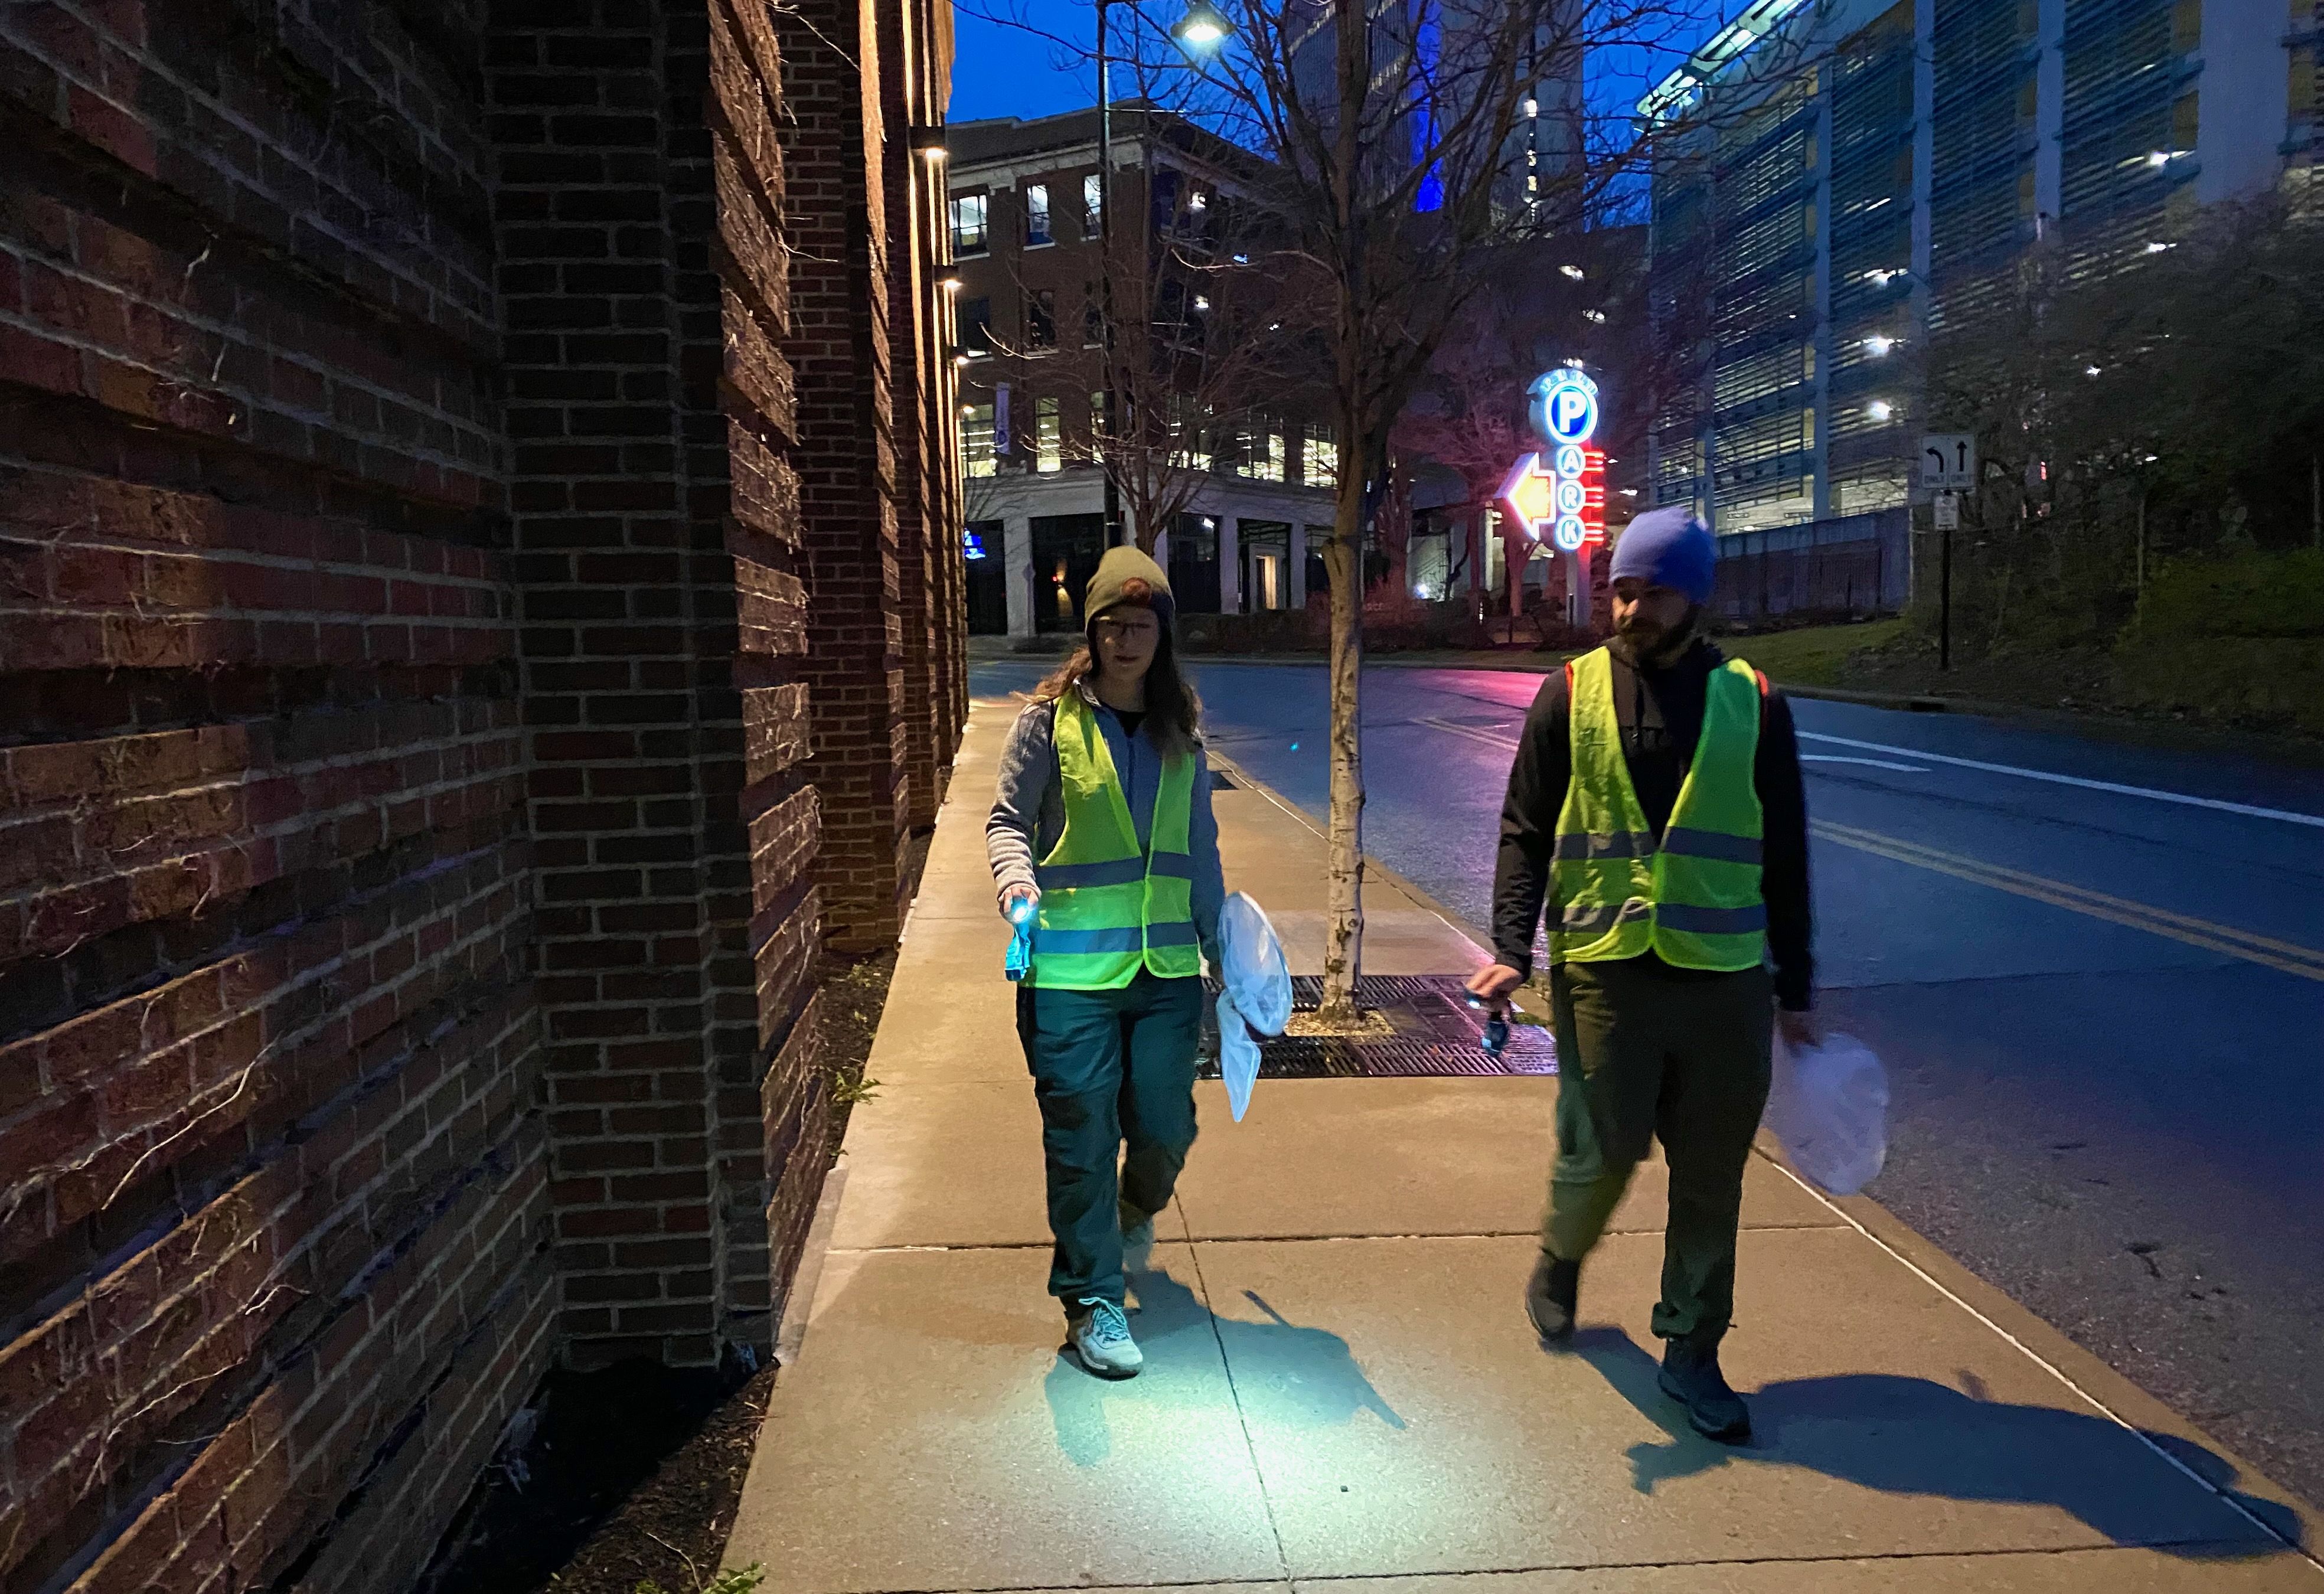 A man and woman in neon yellow vests walk down a street near a brick wall, carrying nets and flashlights